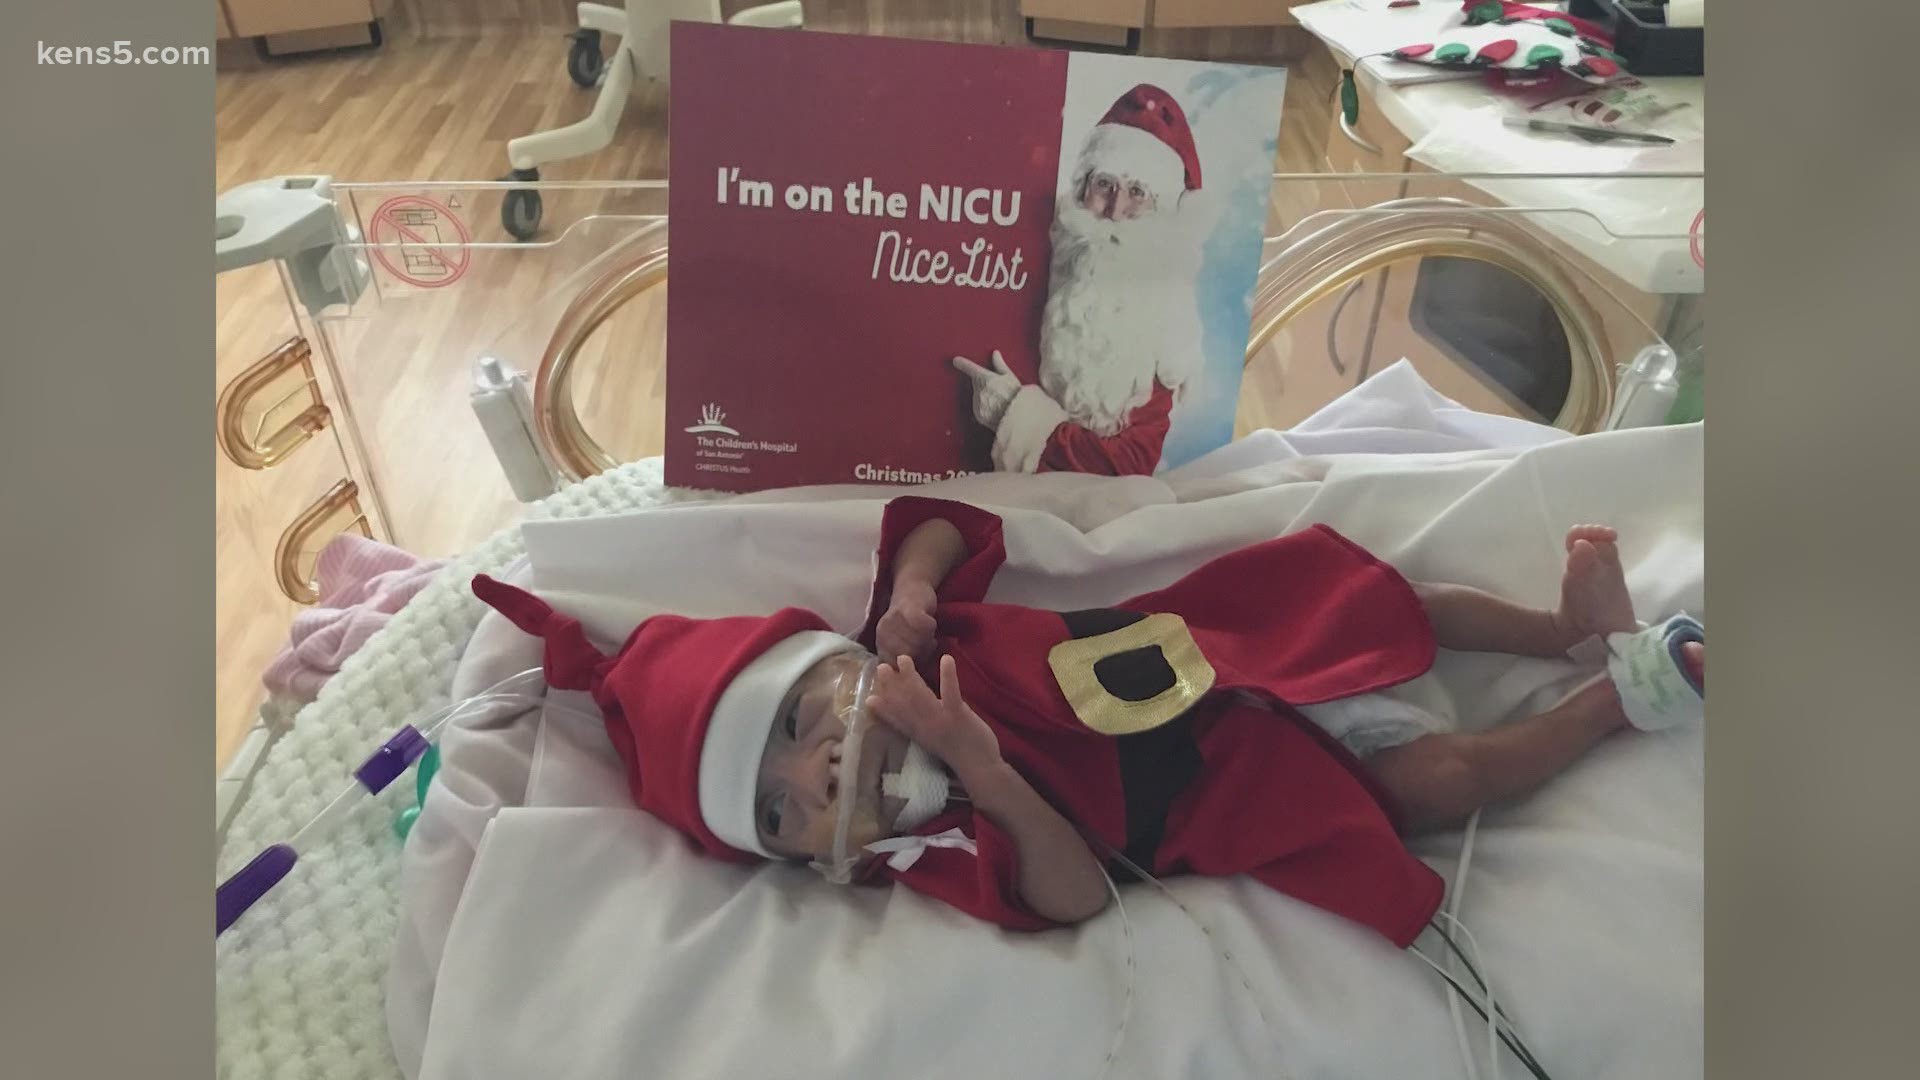 The NICU nurses helped Santa make his special deliveries this year.